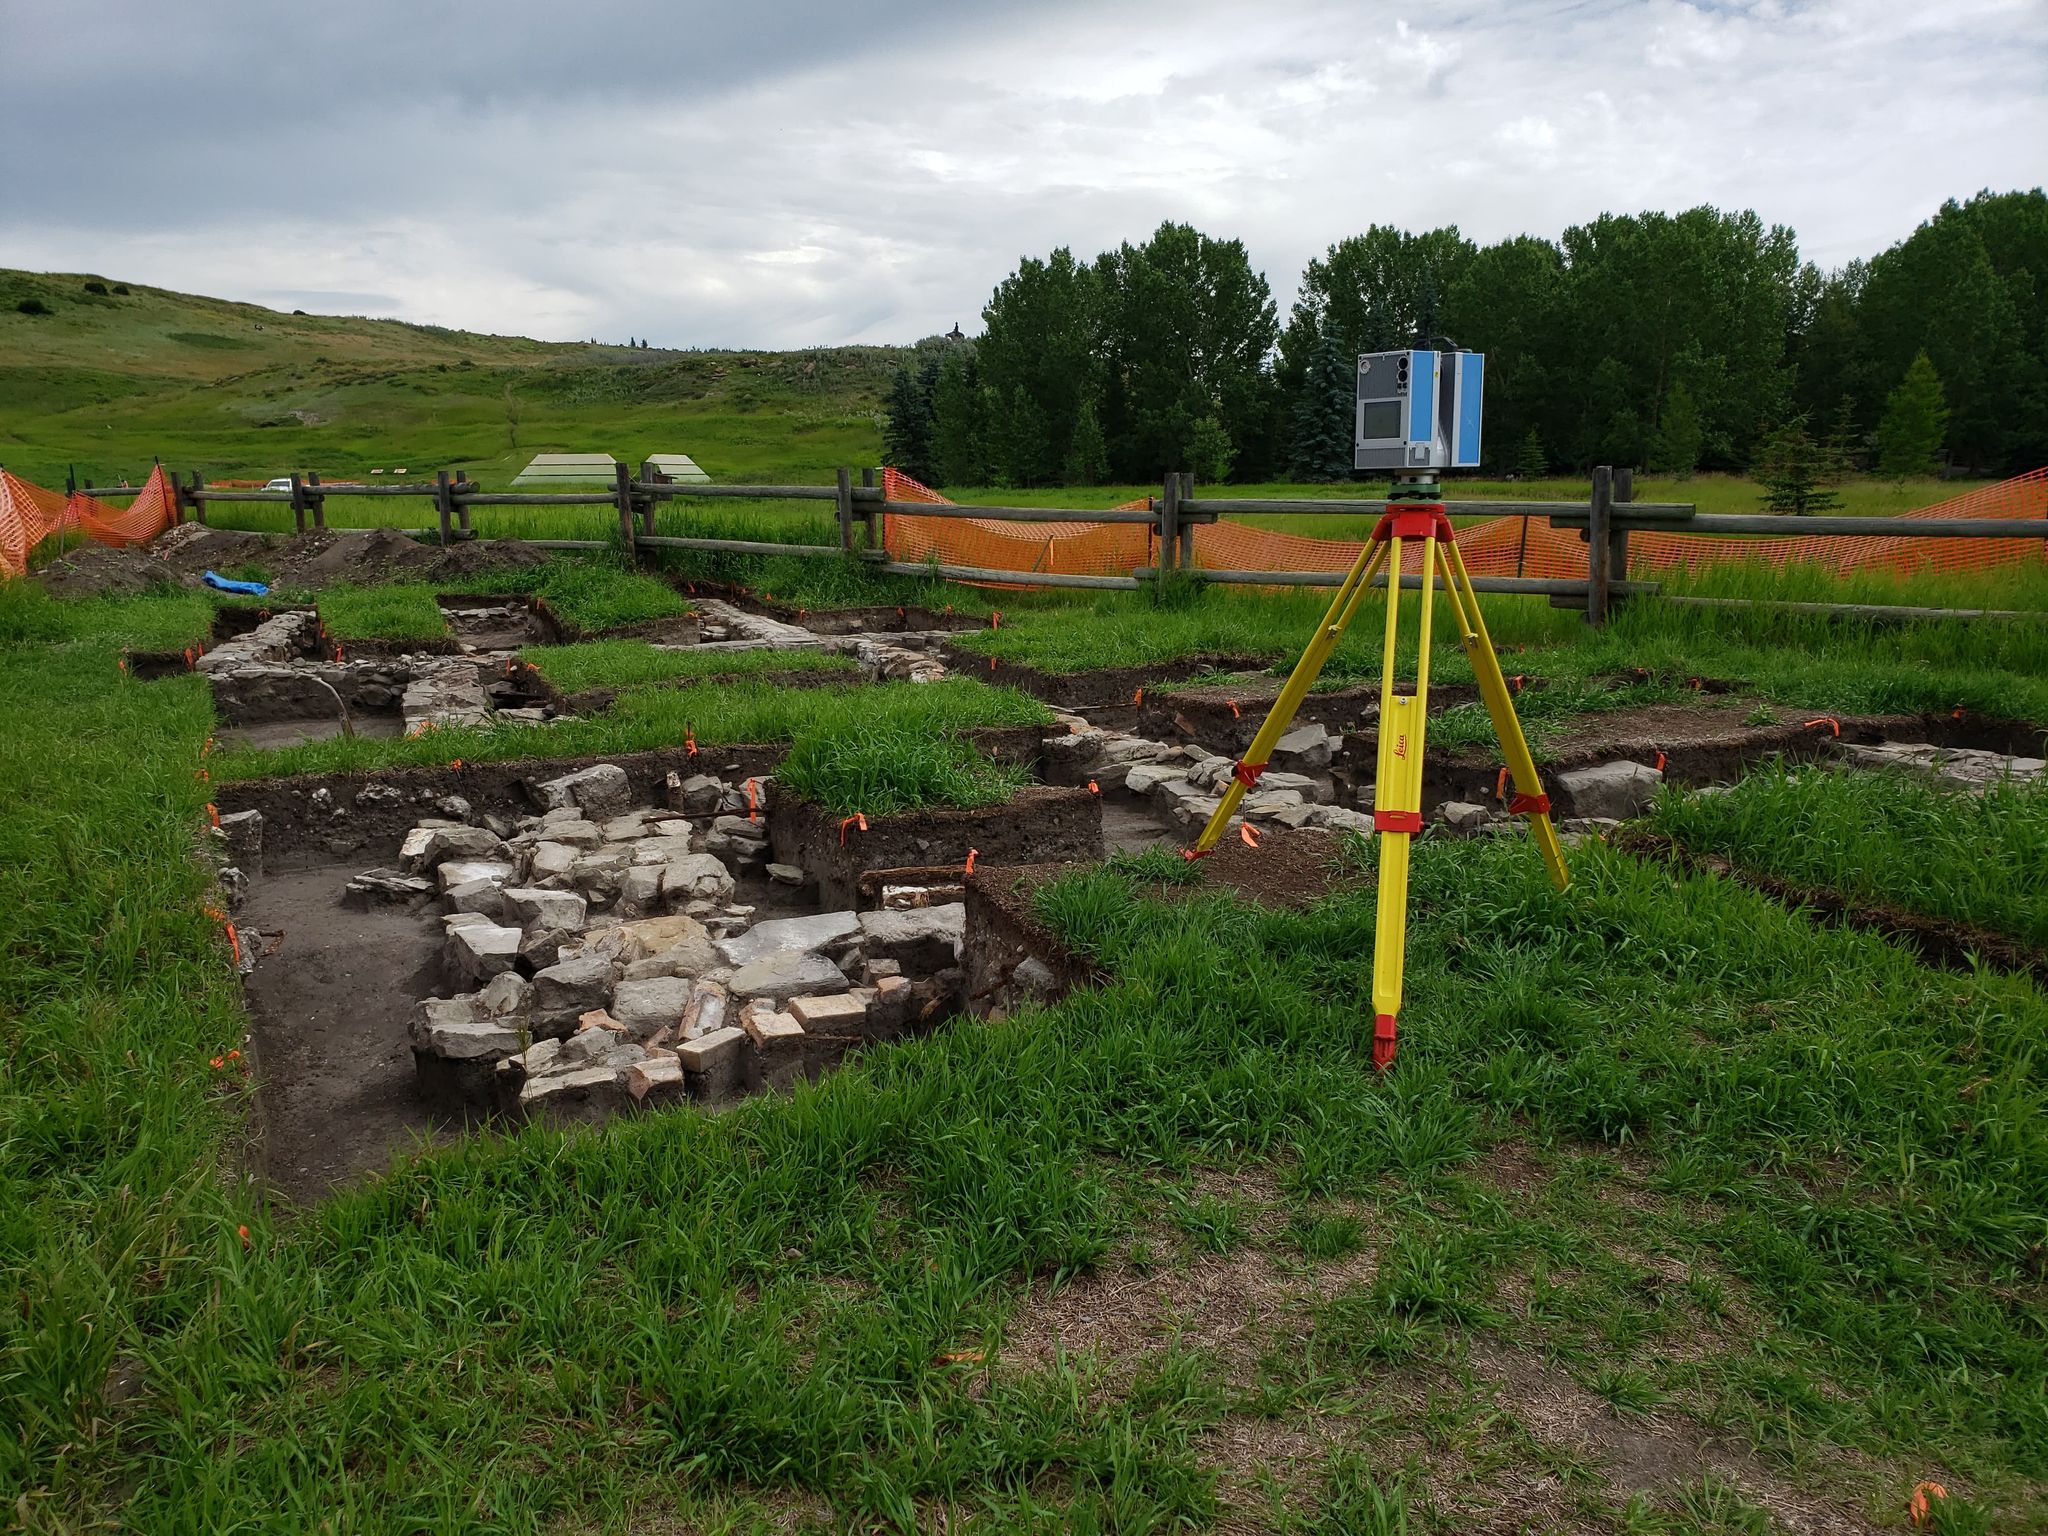 Scanning the remains of a building at the Cochrane Ranche with the Z+F 5010X, July 2020.